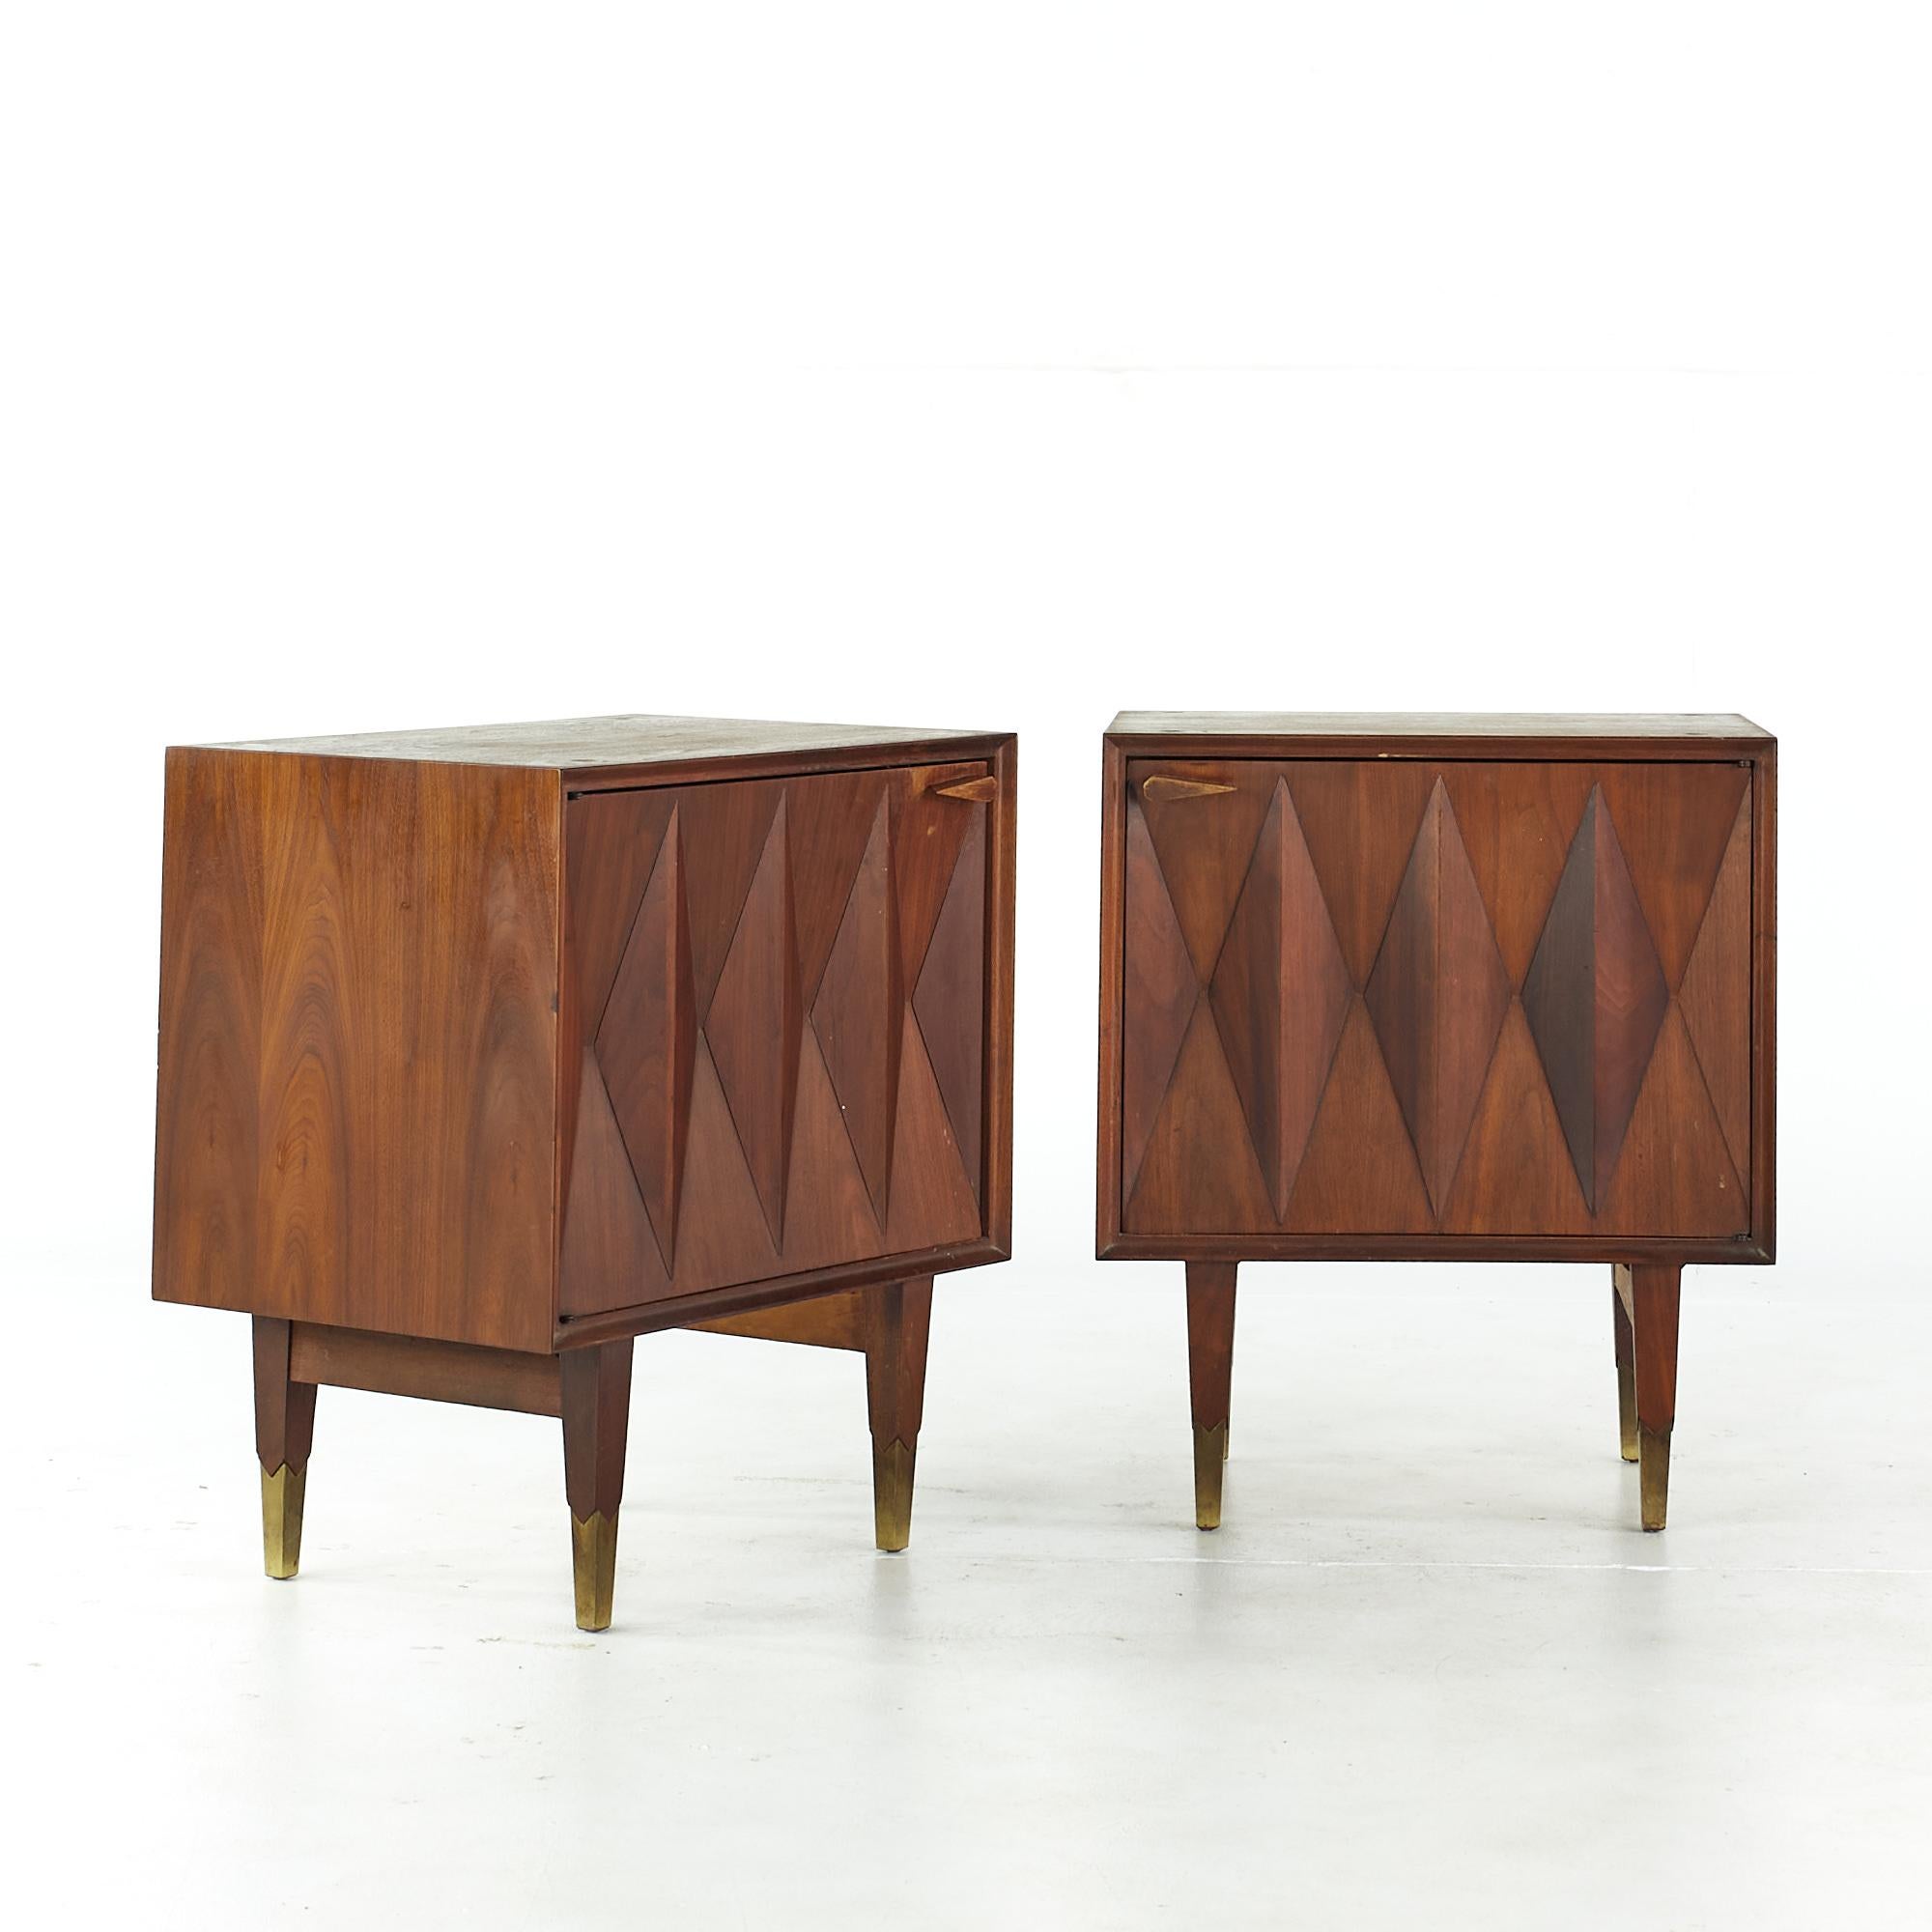 Albert Parvin Mid Century Diamond Walnut nightstands - pair

Each nightstand measures: 21.5 wide x 16 deep x 25.25 inches high

All pieces of furniture can be had in what we call restored vintage condition. That means the piece is restored upon